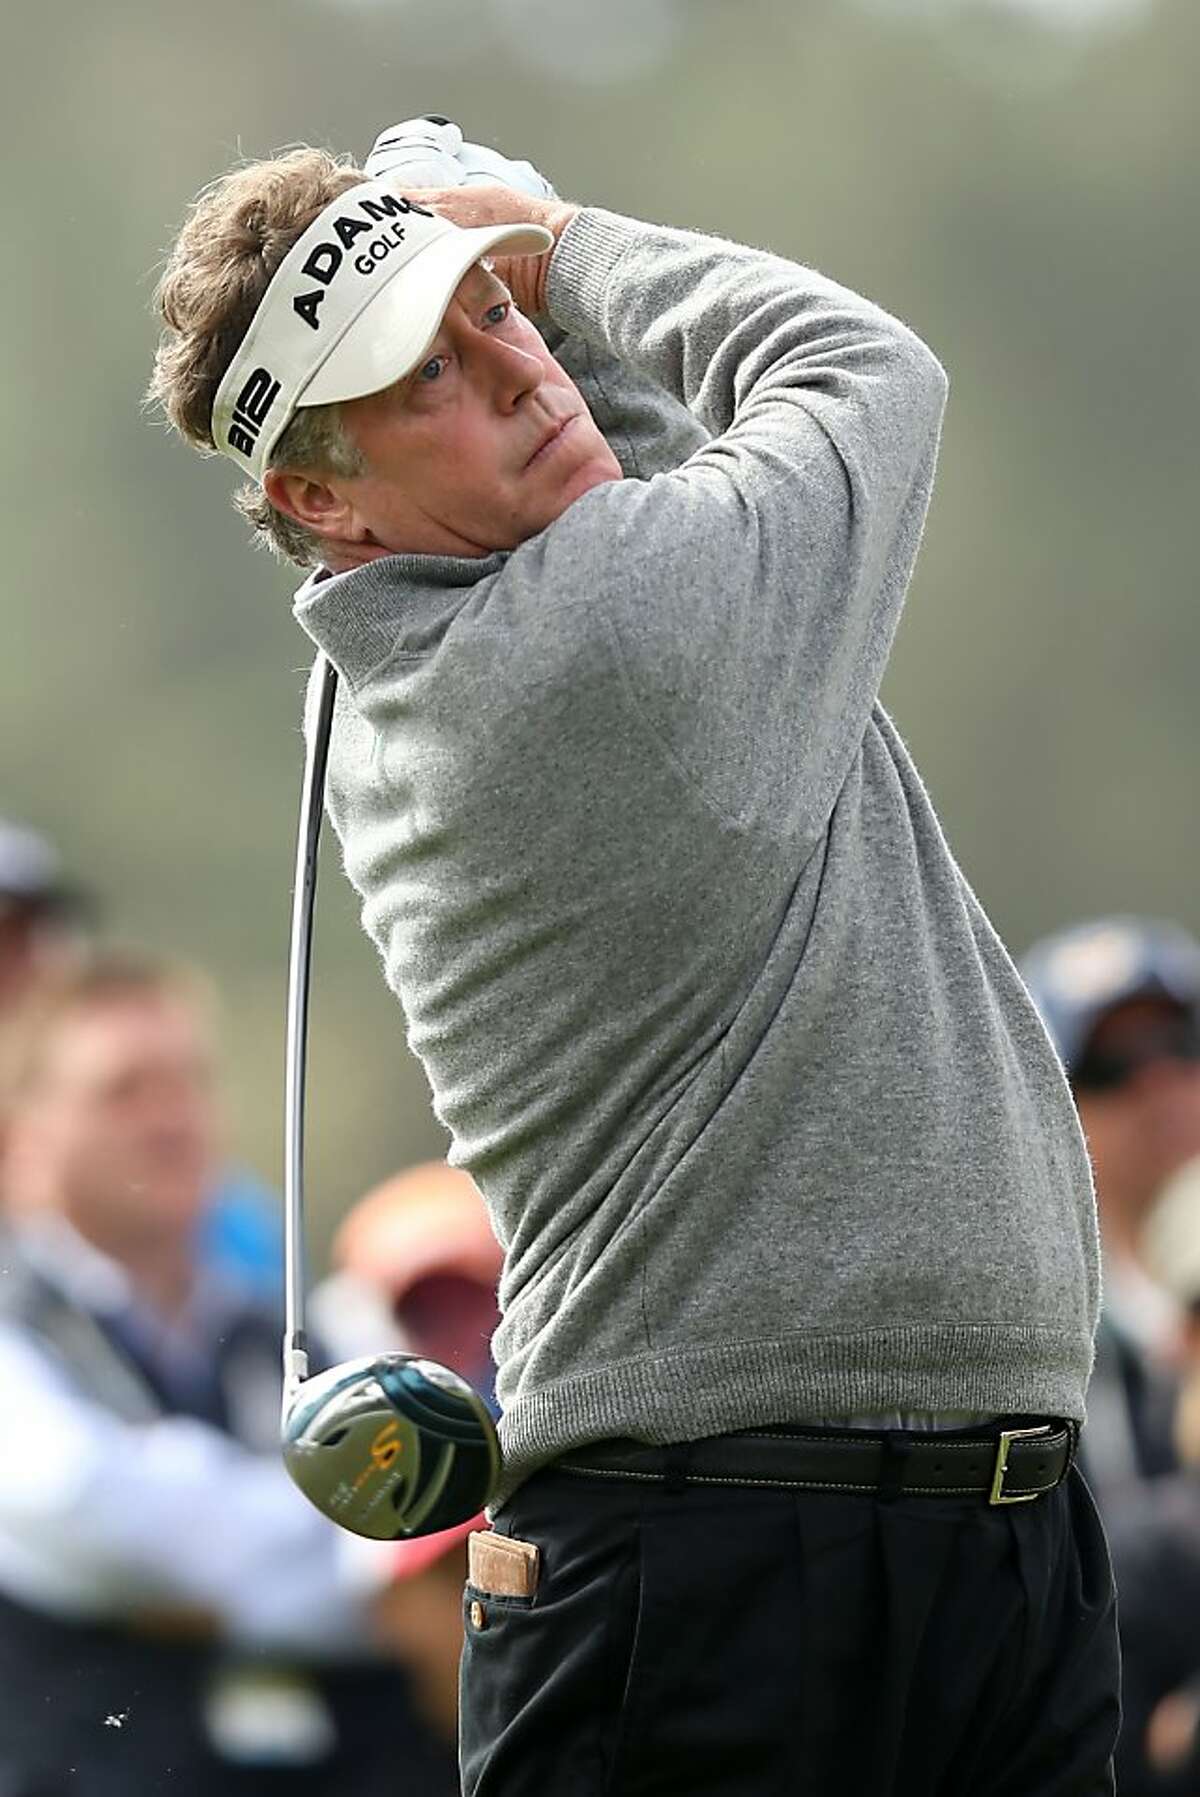 SAN FRANCISCO, CA - JUNE 14: Michael Allen of the United States hits a tee shot during the first round of the 112th U.S. Open at The Olympic Club on June 14, 2012 in San Francisco, California. (Photo by Ezra Shaw/Getty Images)